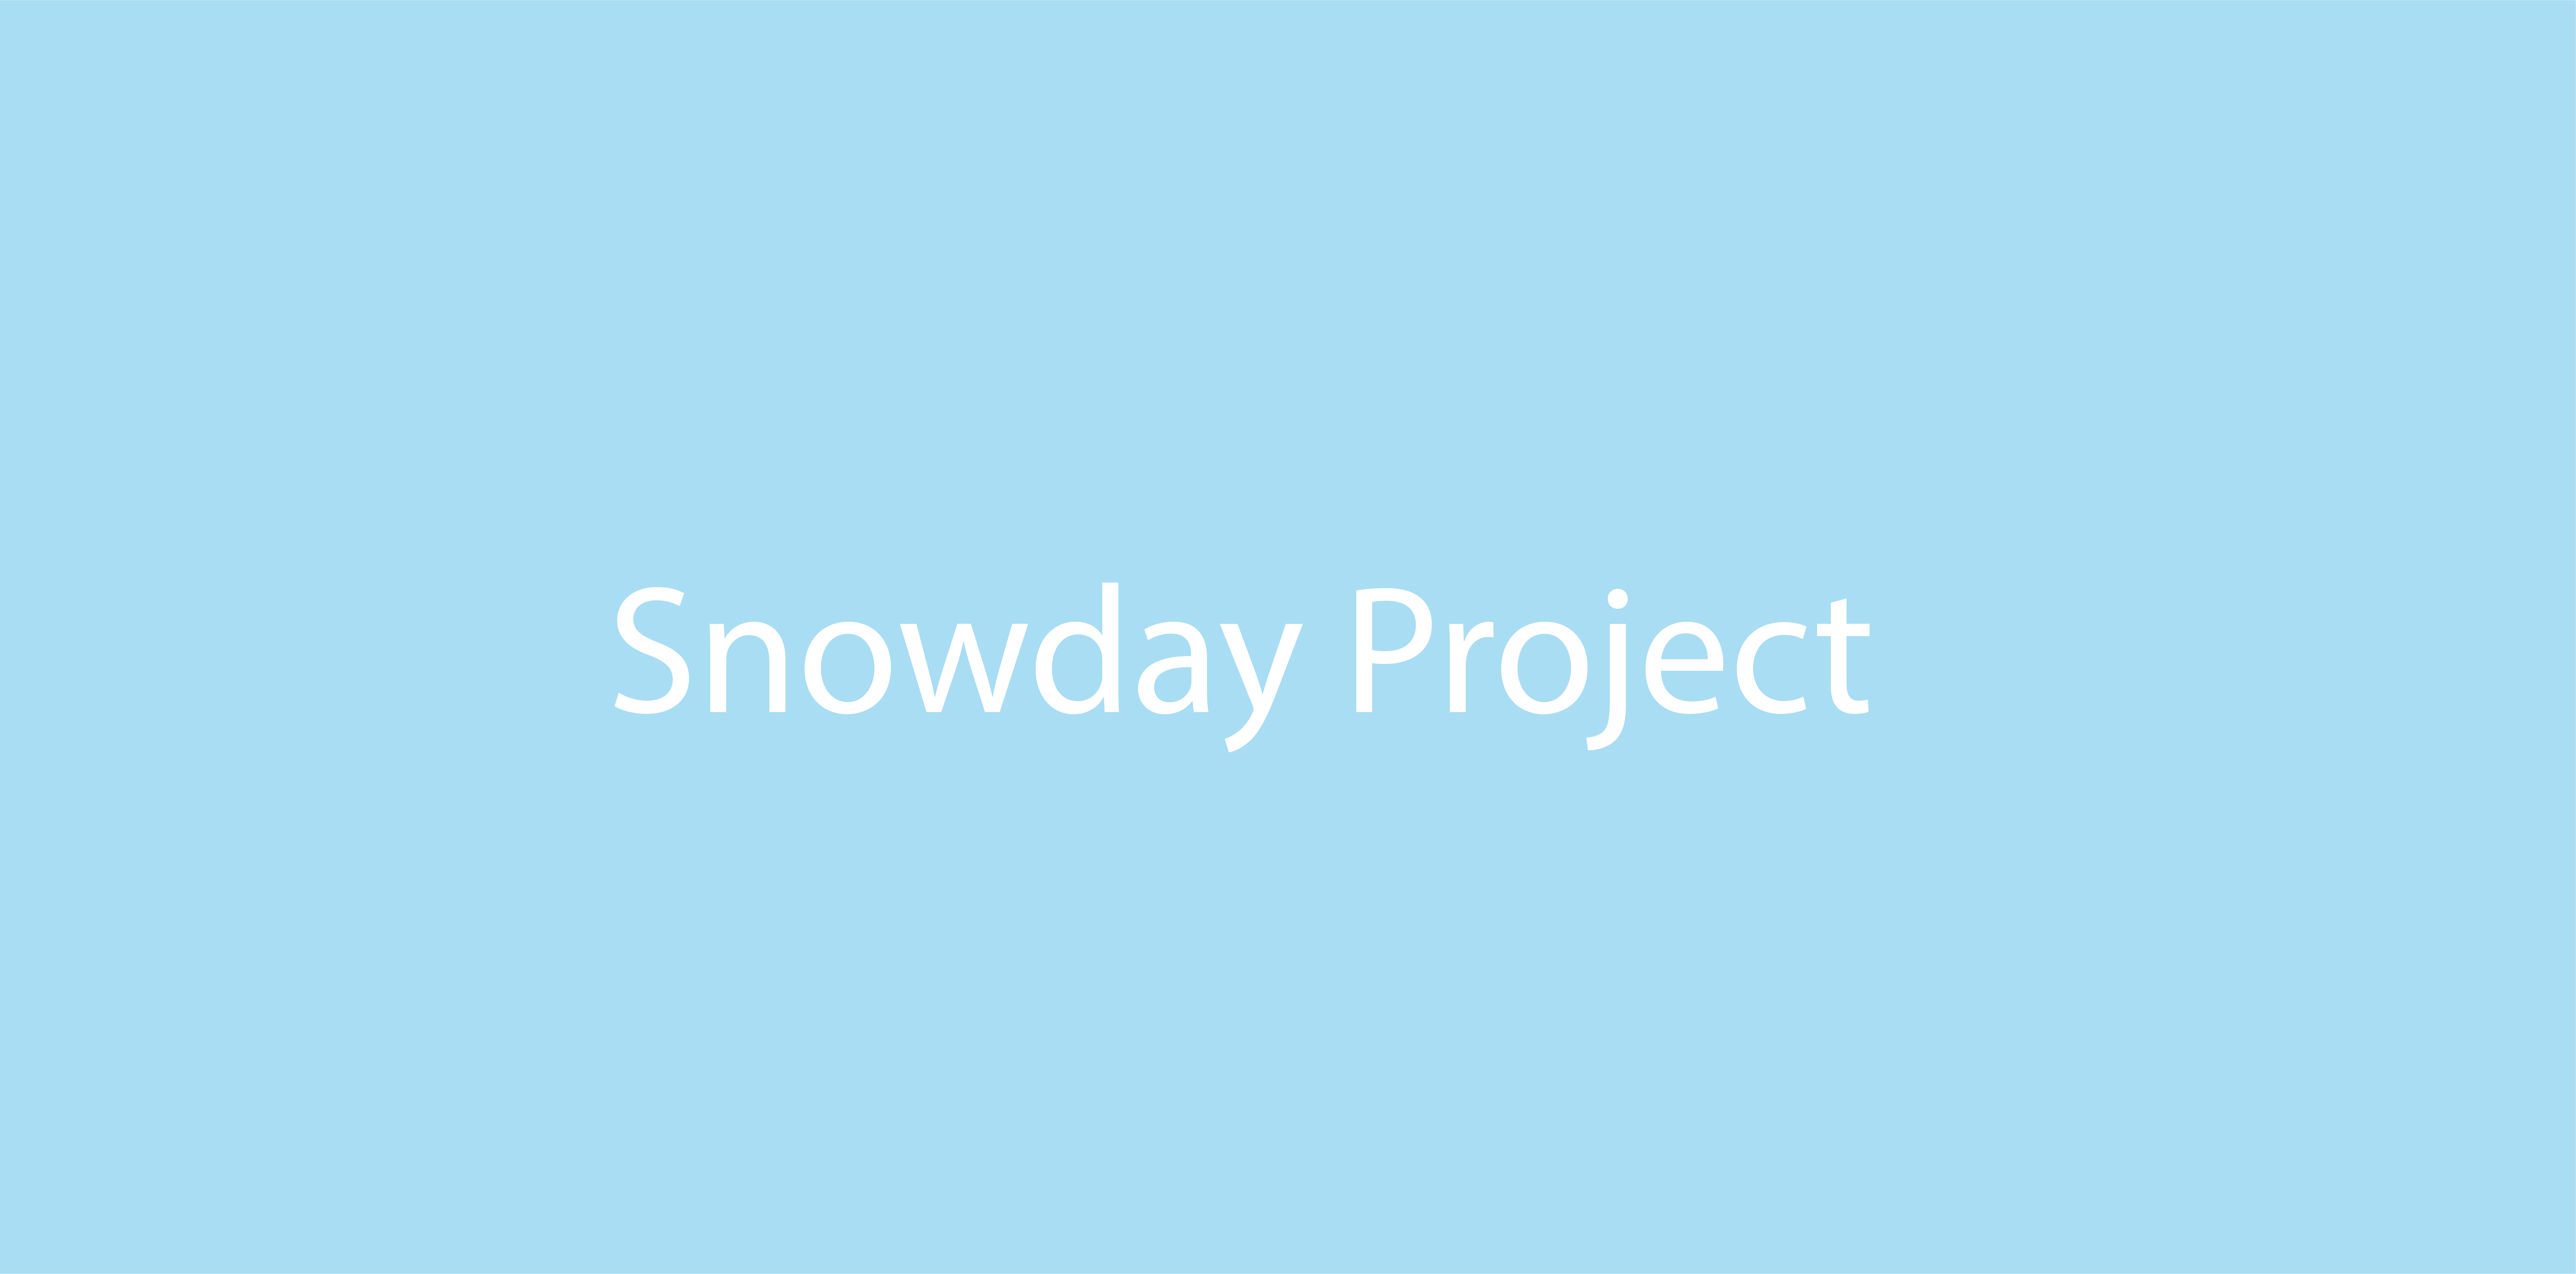 Snowday Project